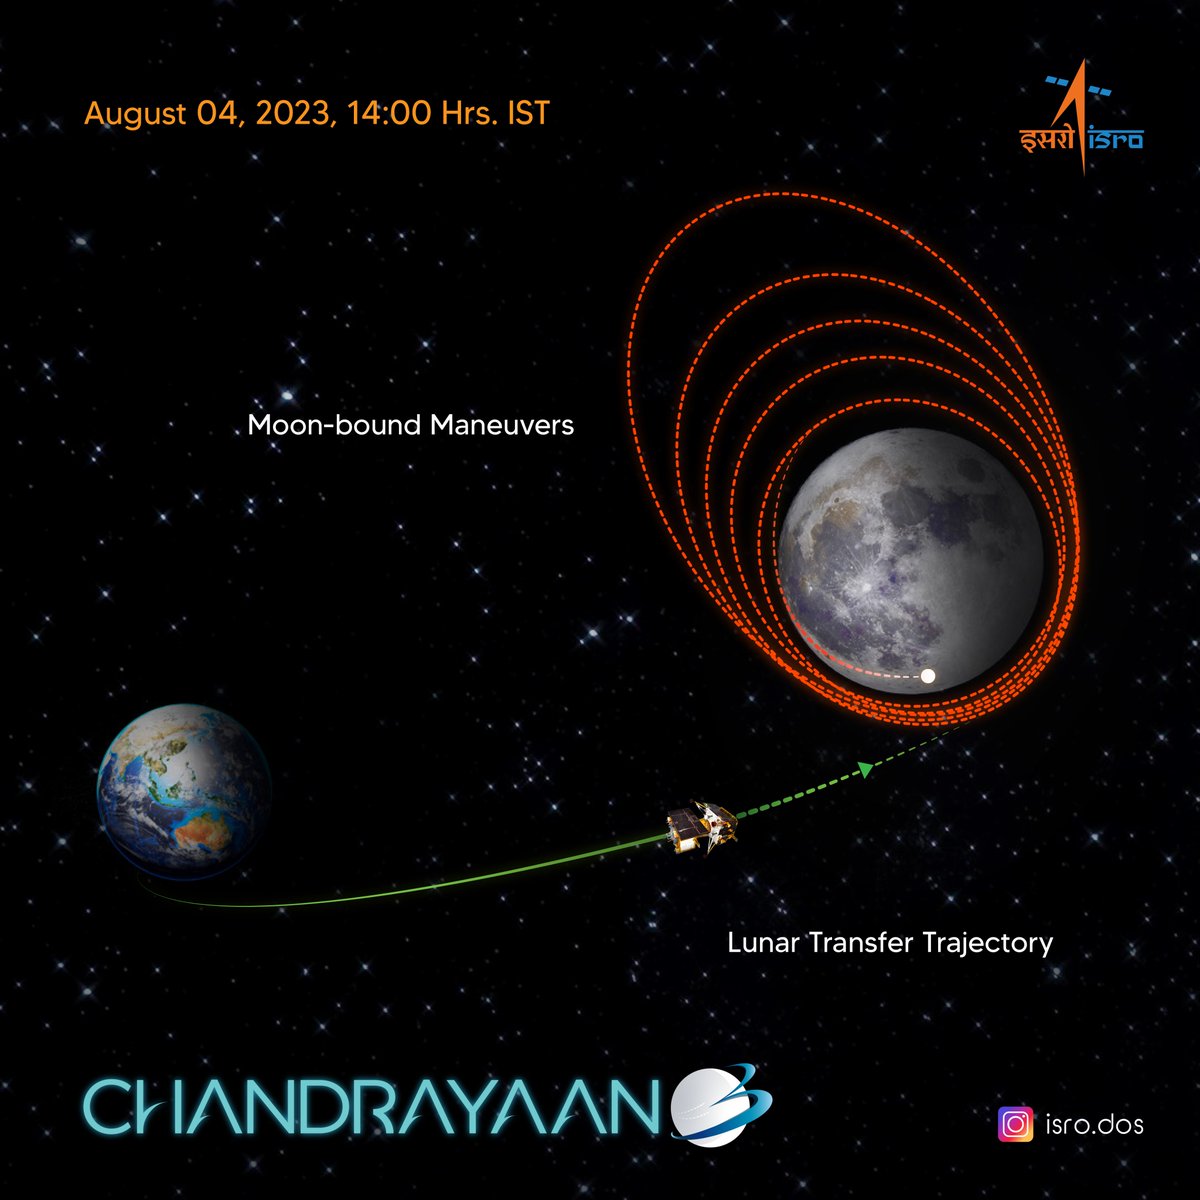 Chandrayaan-3 Mission: The spacecraft has covered about two-thirds of the distance to the moon. Lunar Orbit Injection (LOI) set for Aug 5, 2023, around 19:00 Hrs. IST.